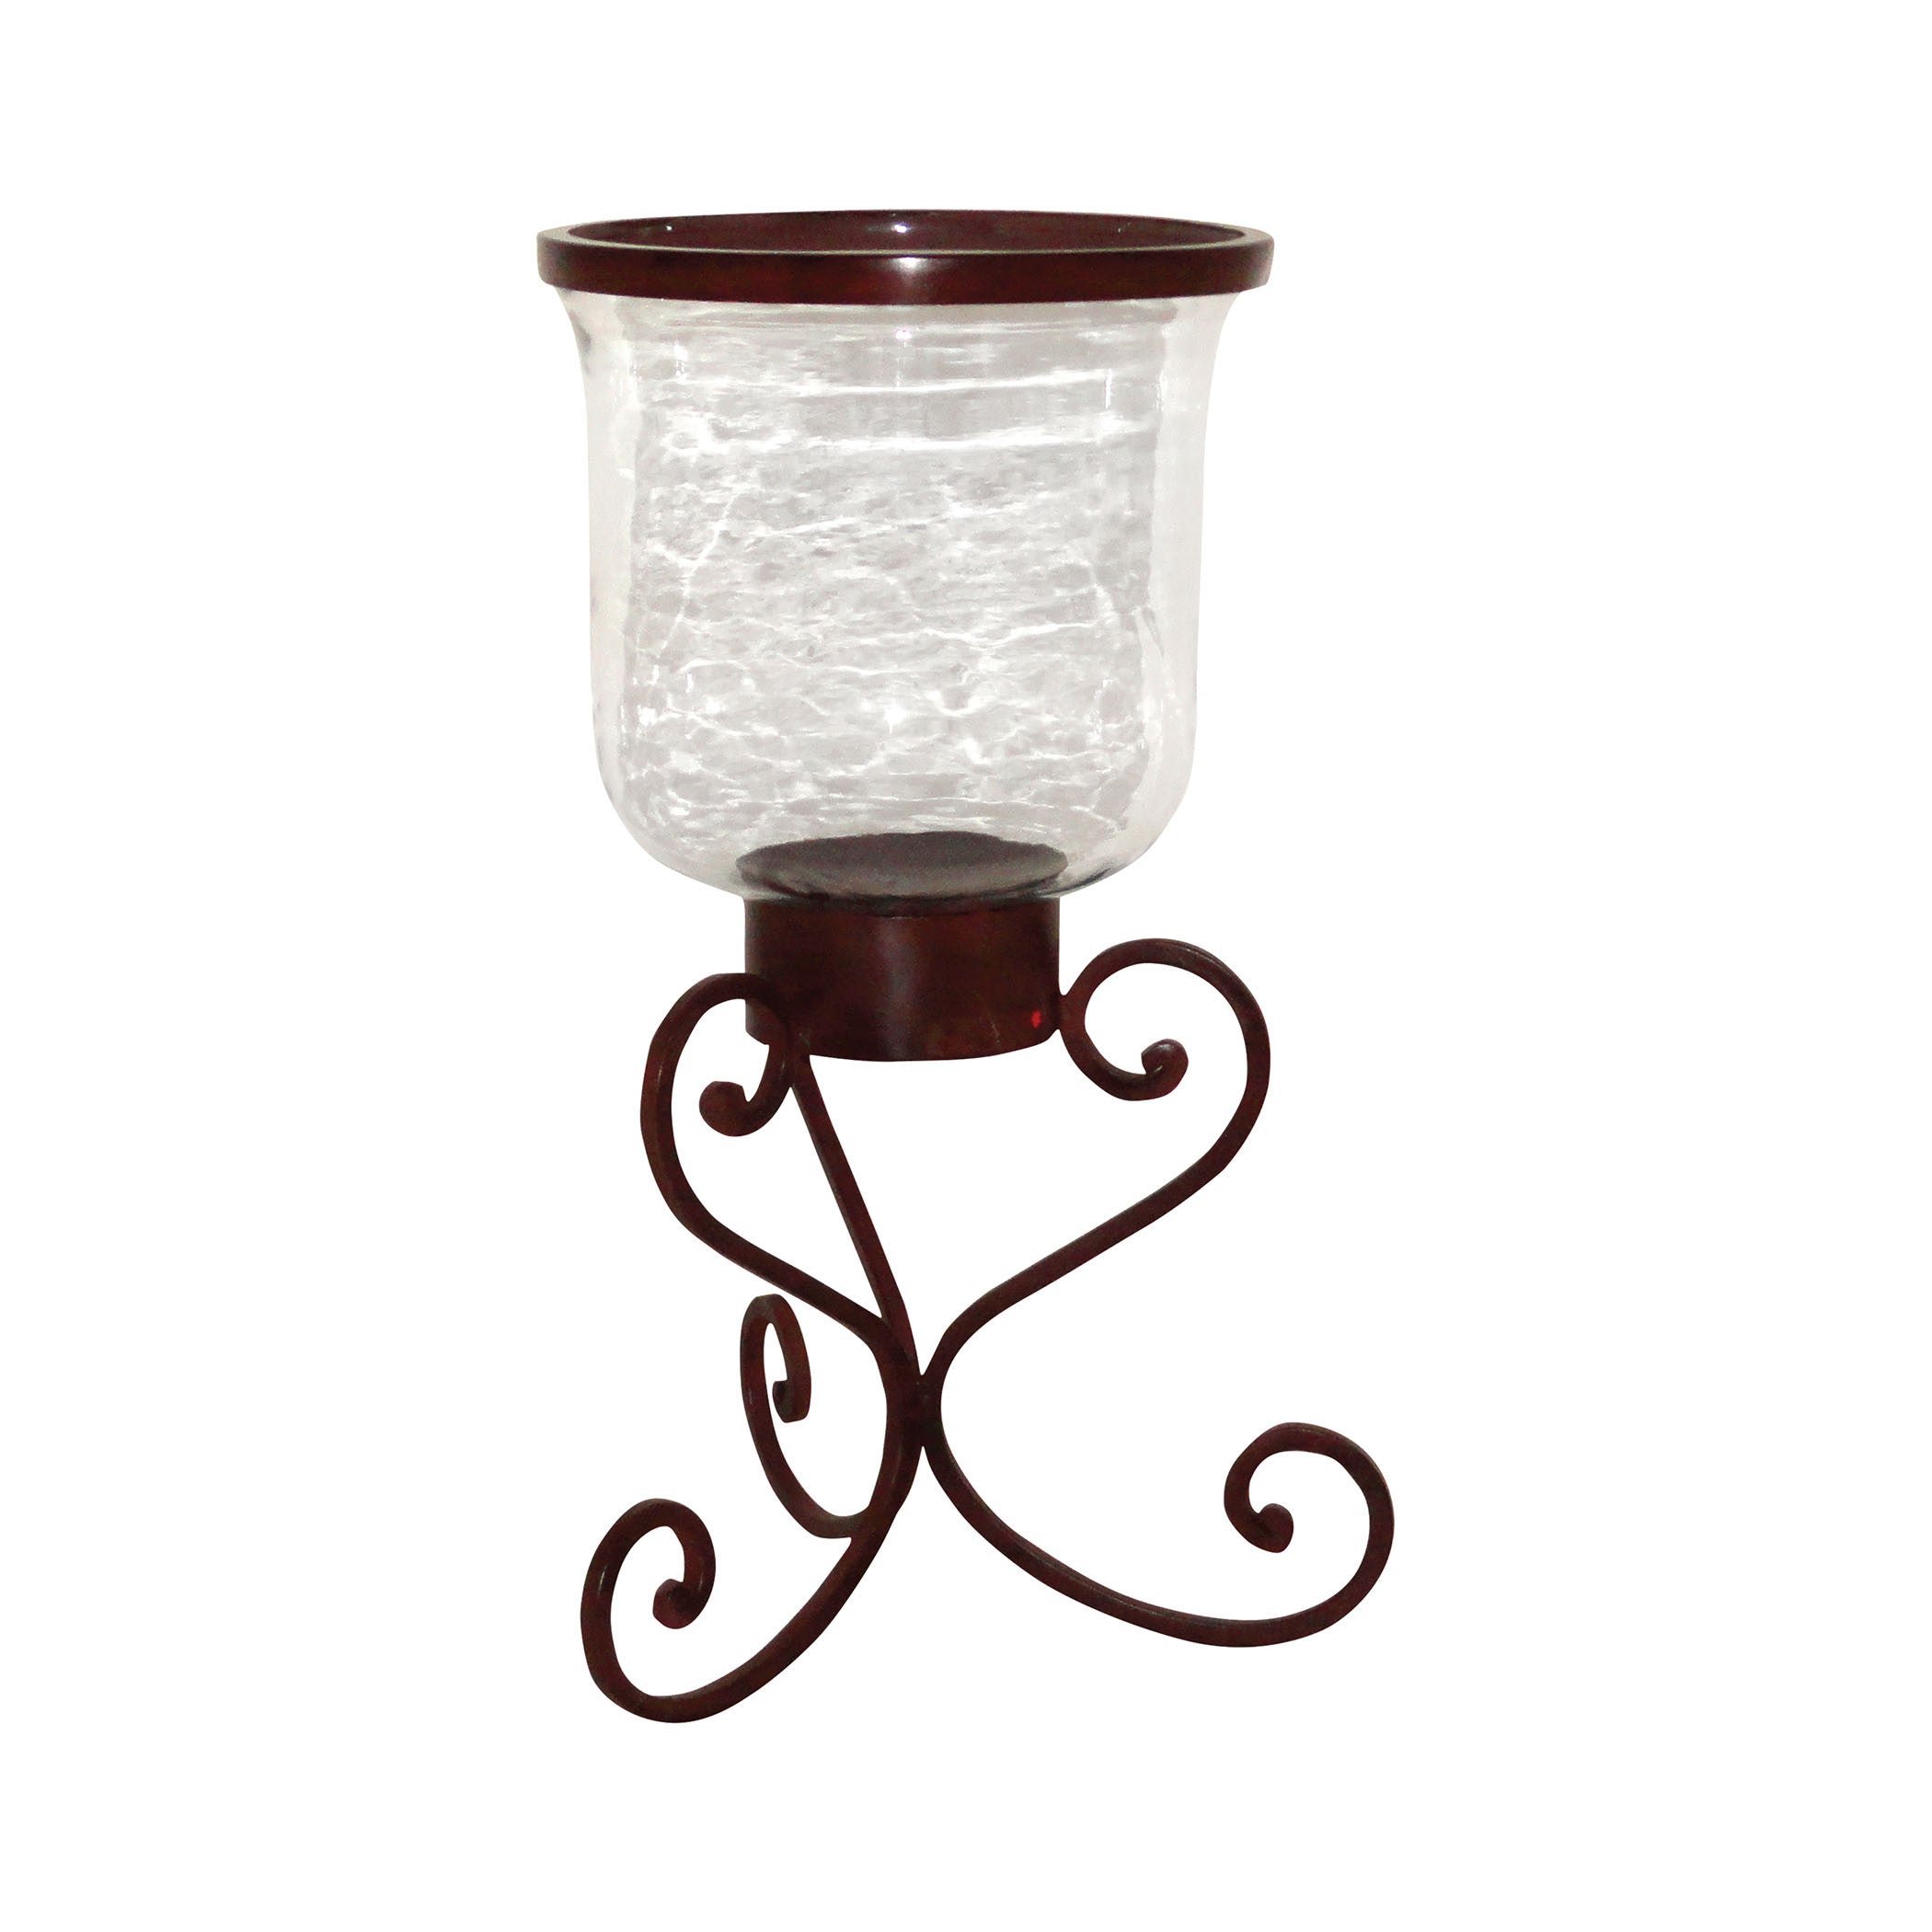 Pomeroy Pom-618147 Deseo Collection Montana Rustic,clear Finish Candle/candle Holder